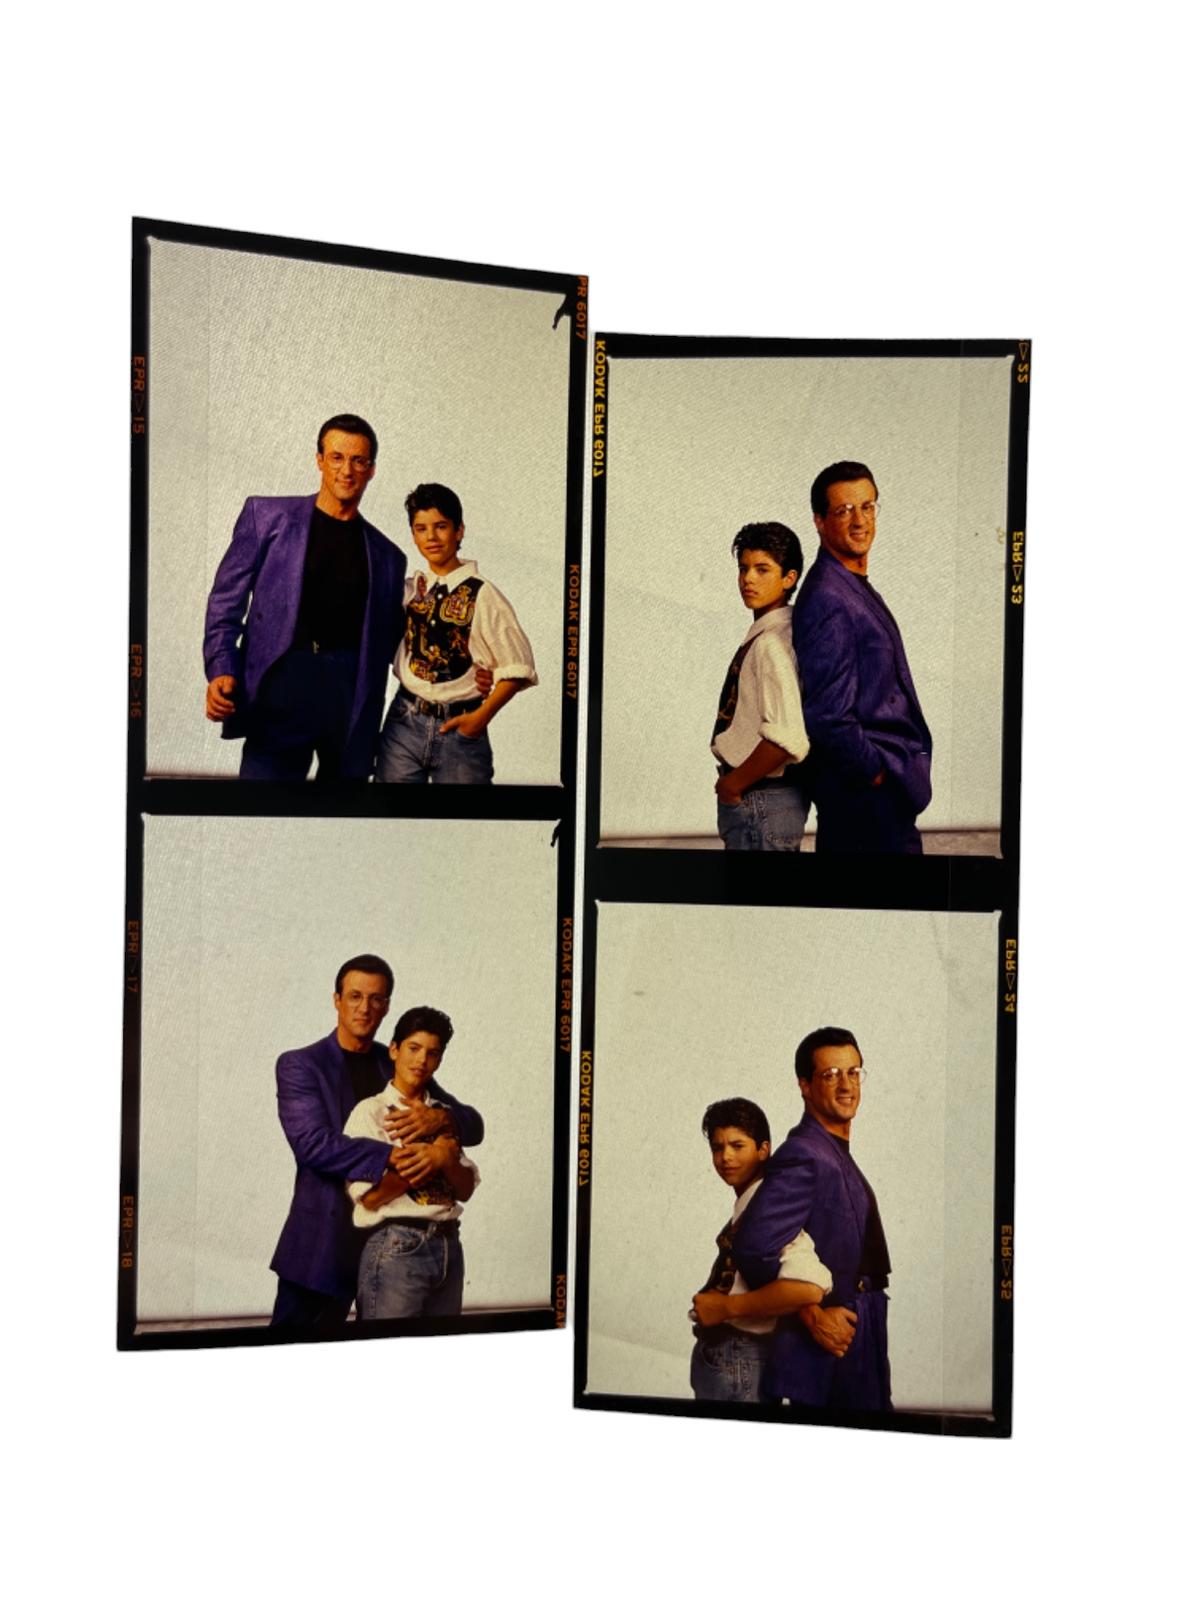 COLOR PHOTO NEGATIVE SYLVESTER STALLONE AND HIS SON